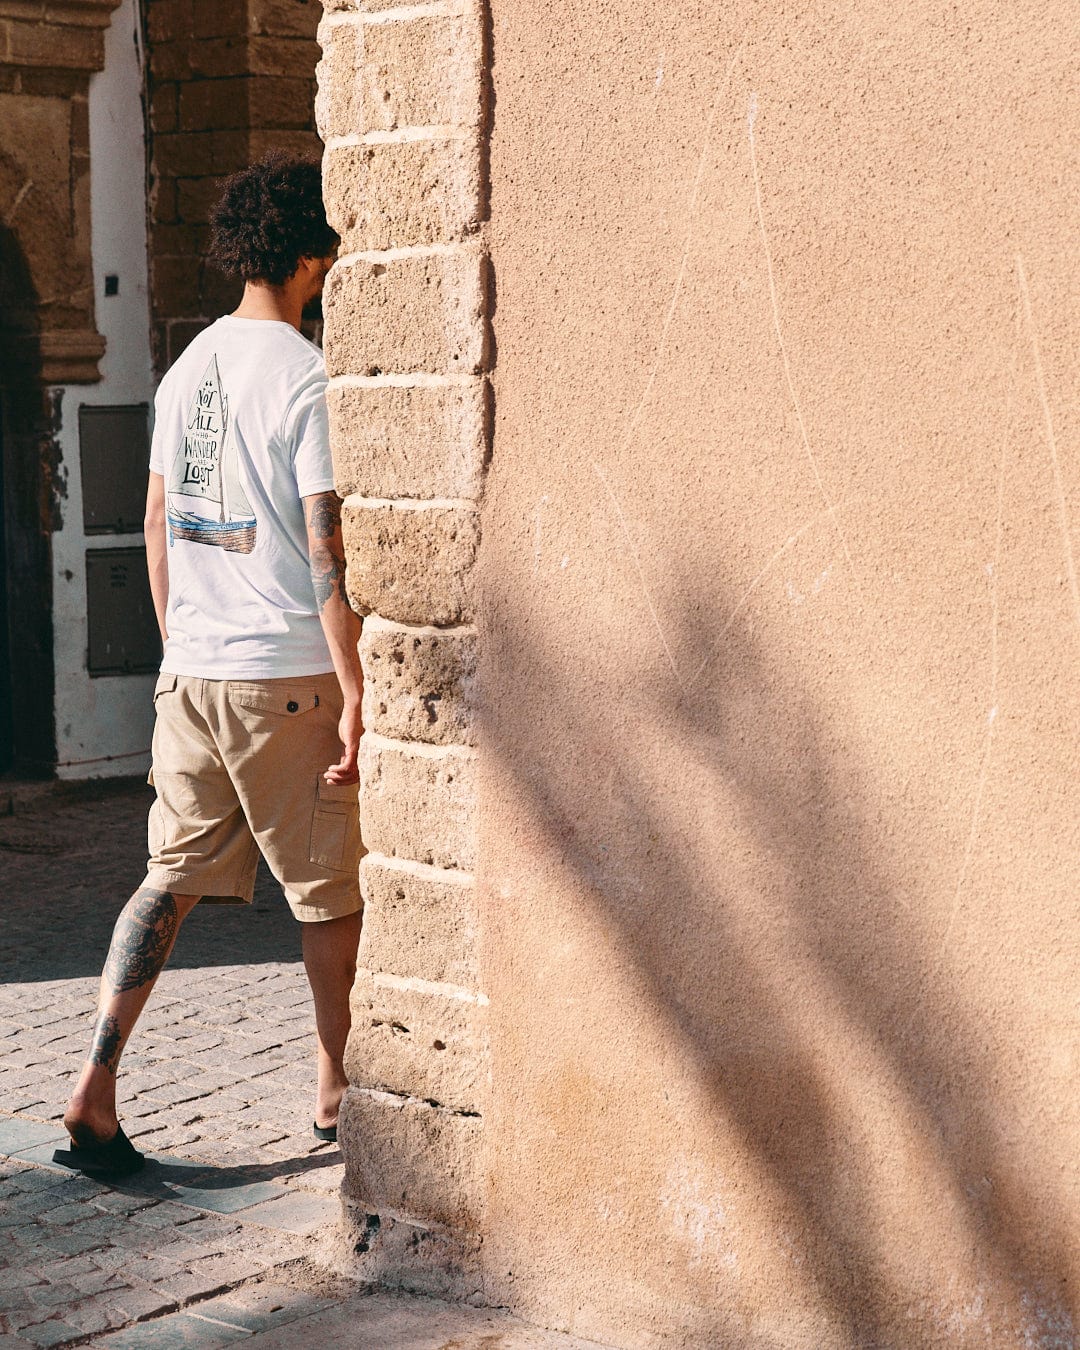 A man with curly hair and tattoos walks past a textured stone wall on a sunny day, casting a shadow. He's wearing a white Saltrock Lost Ships Short Sleeve T-Shirt with a crew neckline.